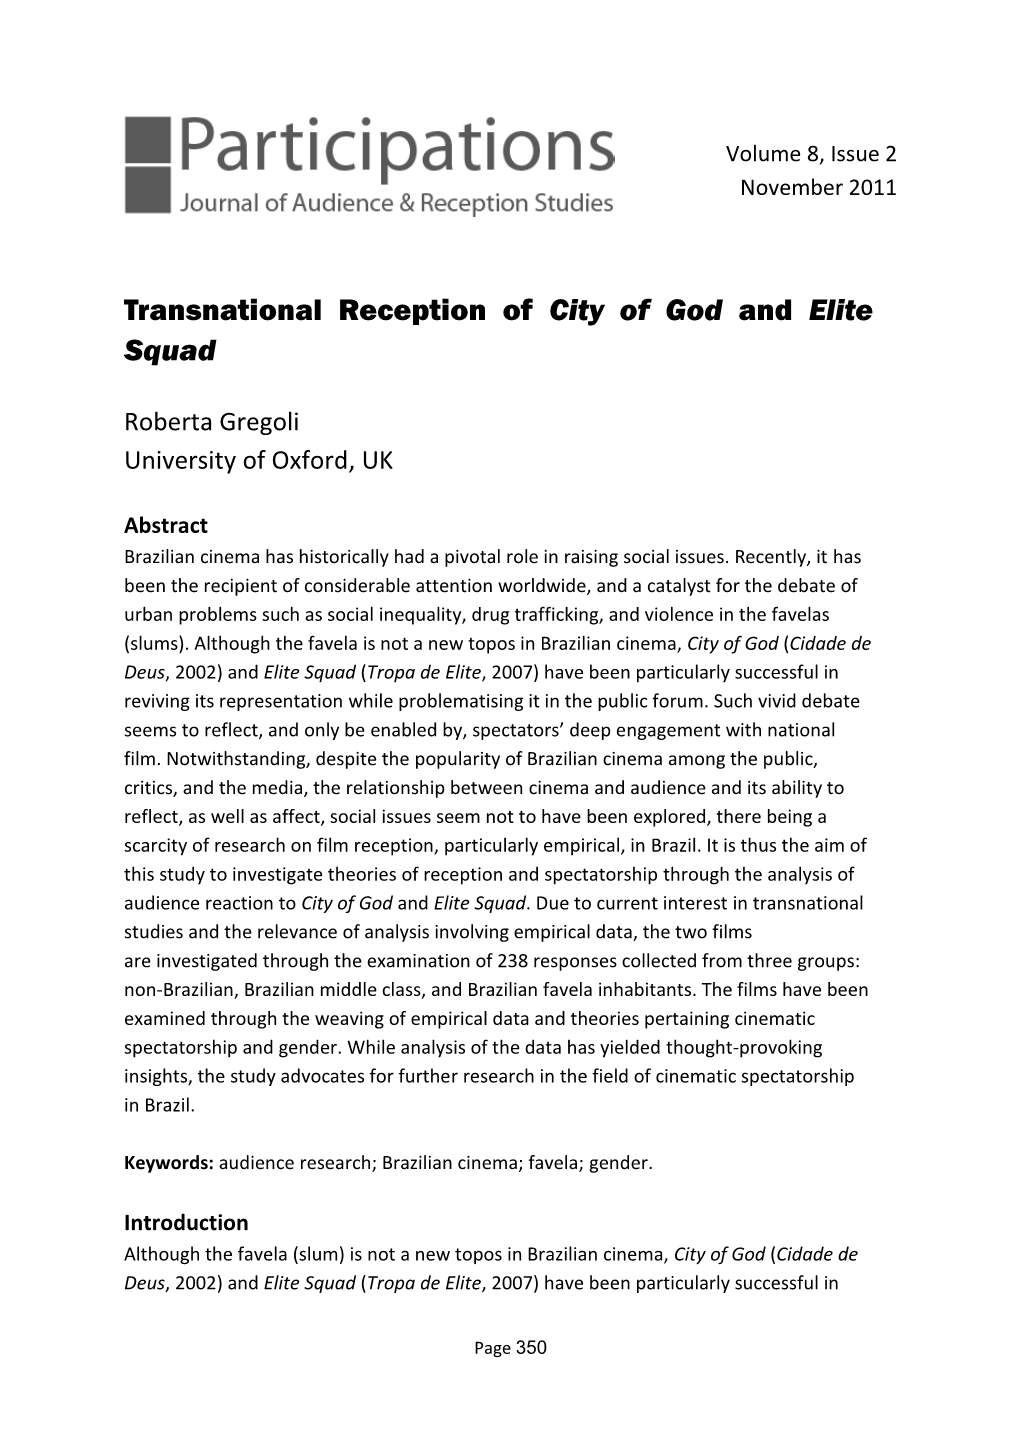 Transnational Reception of City of God and Elite Squad